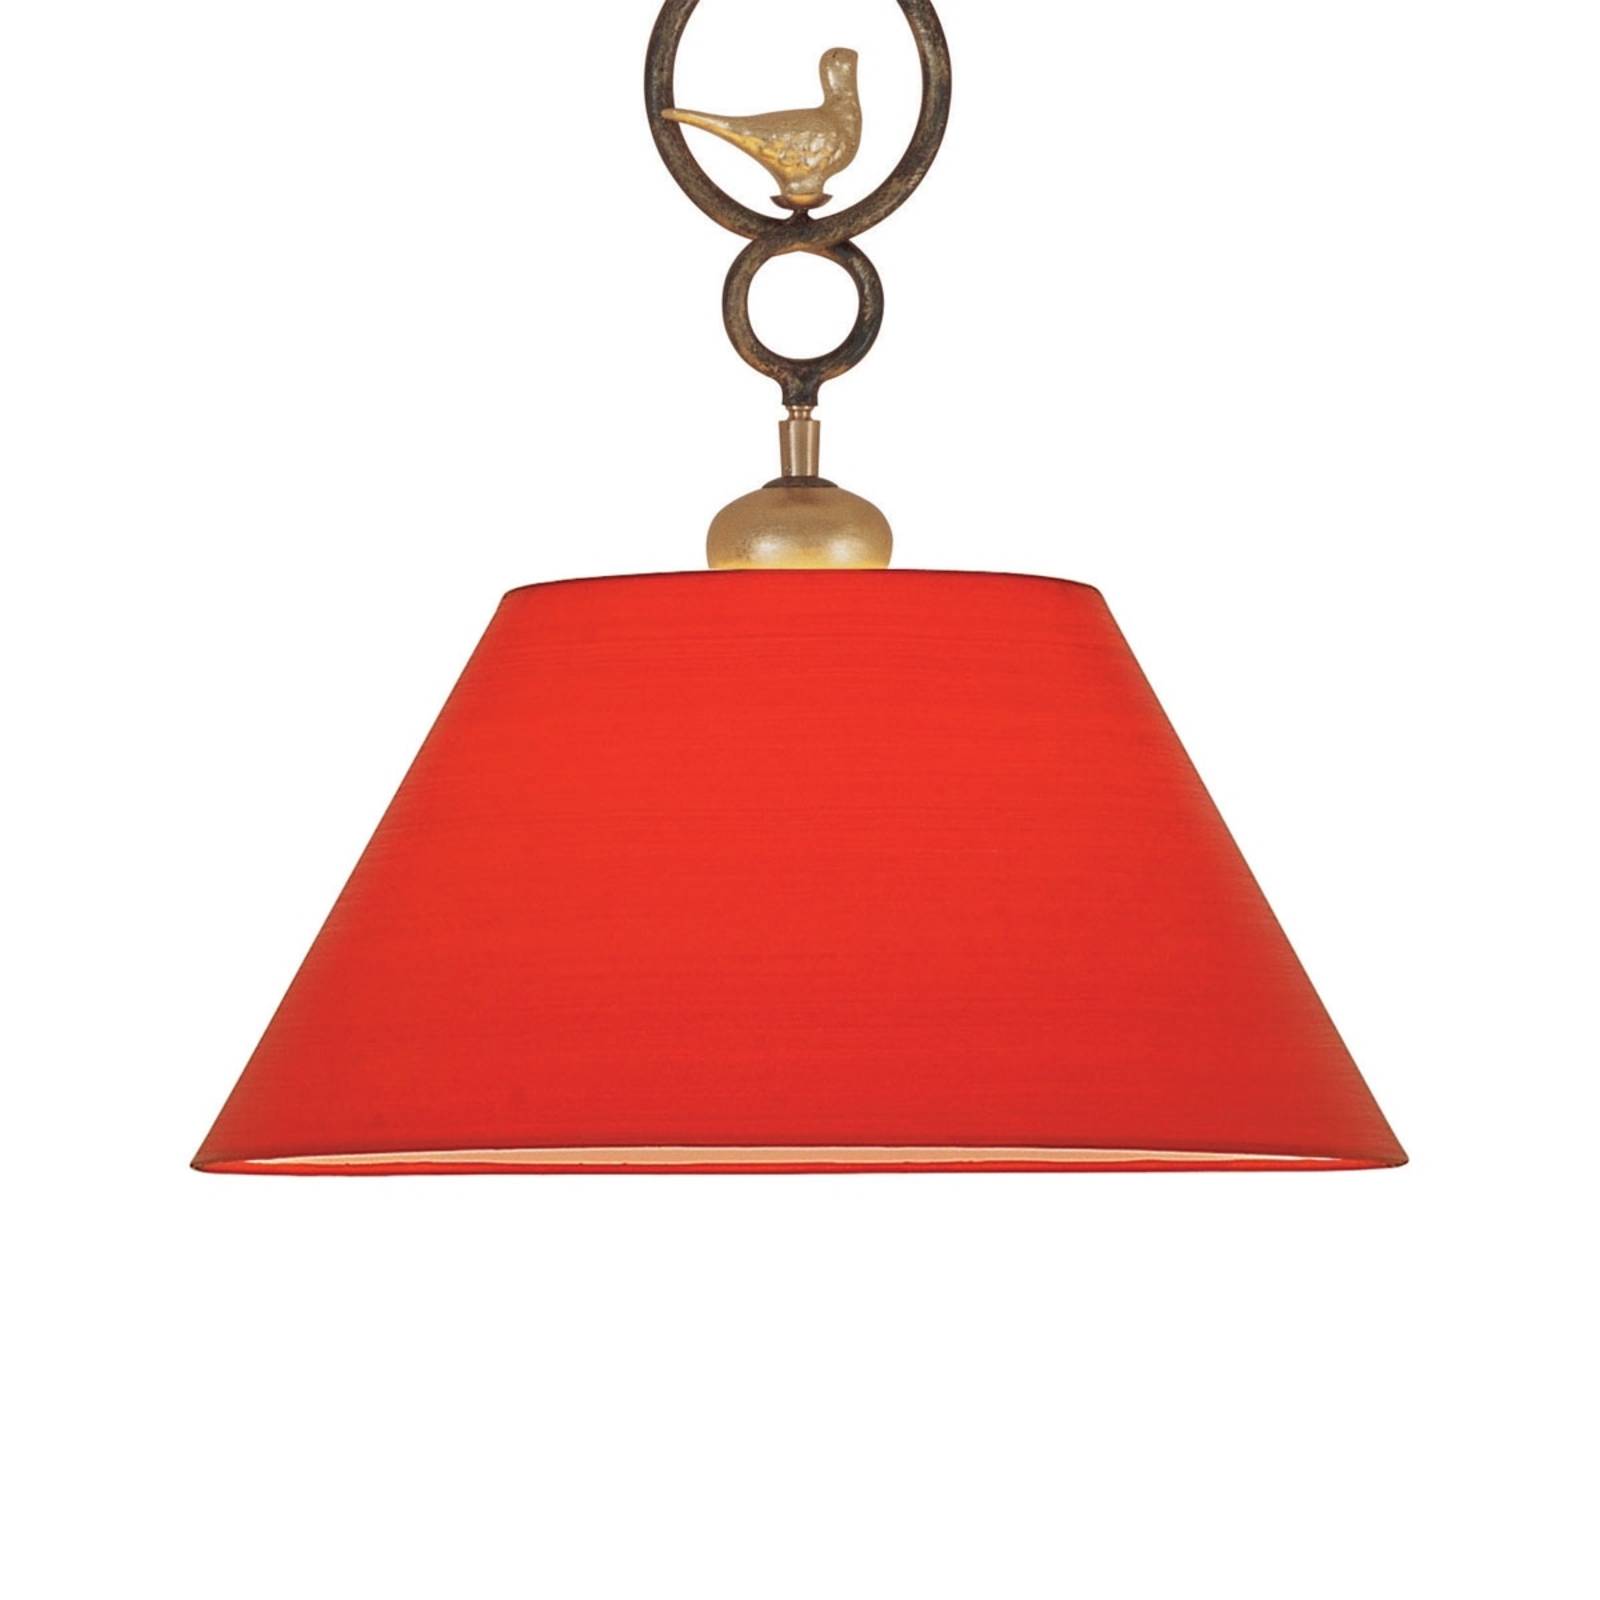 PROVENCE CHALET decorative hanging light in red